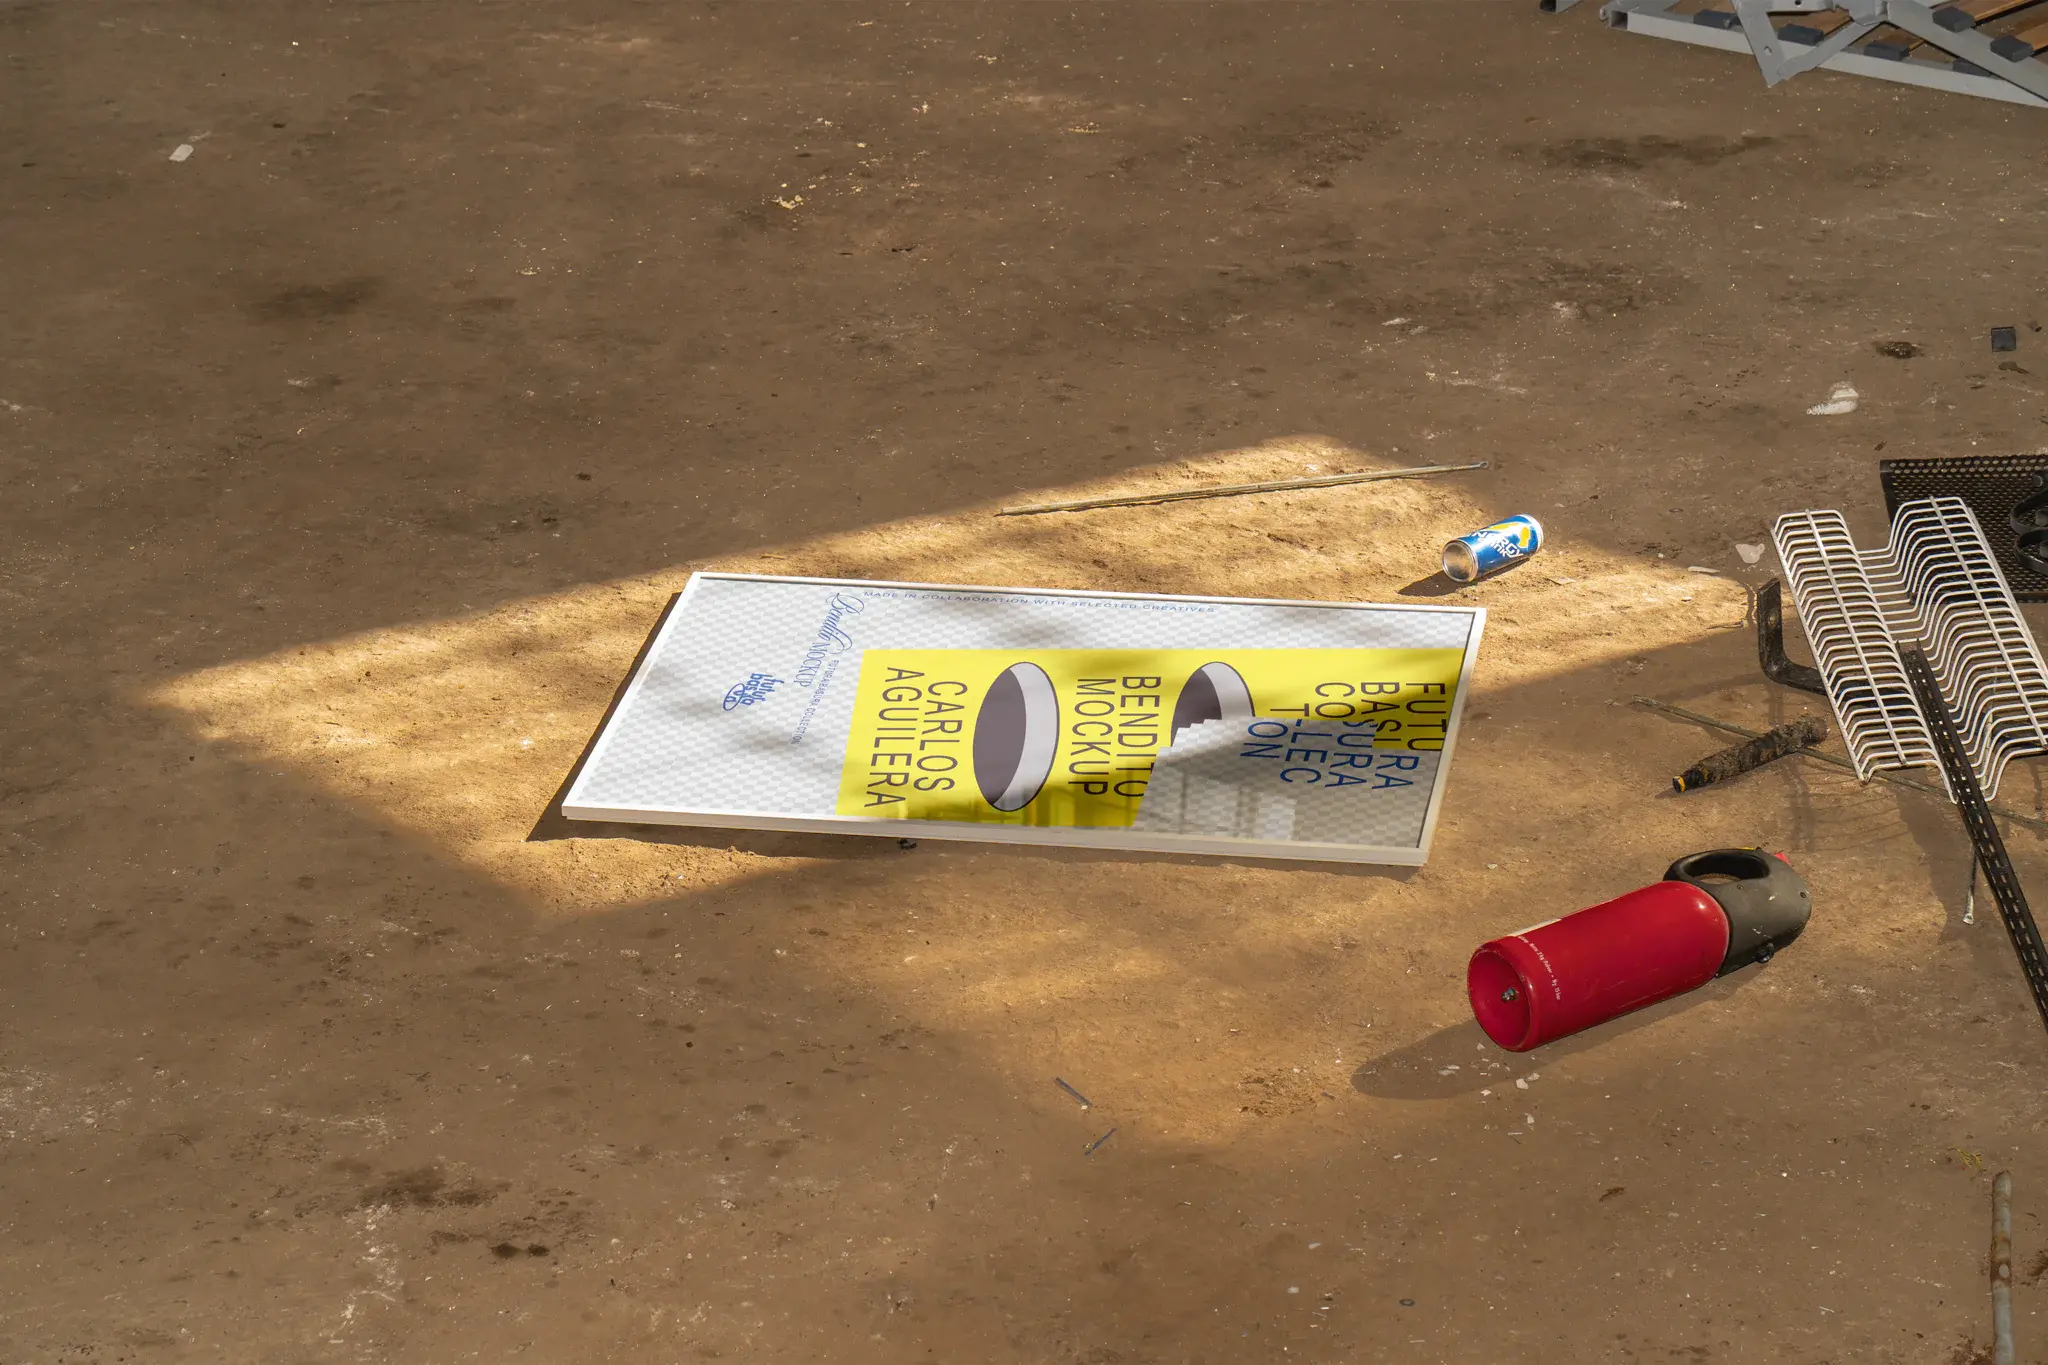 Framed poster mockup on the ground next to a red extinguisher and a blue can